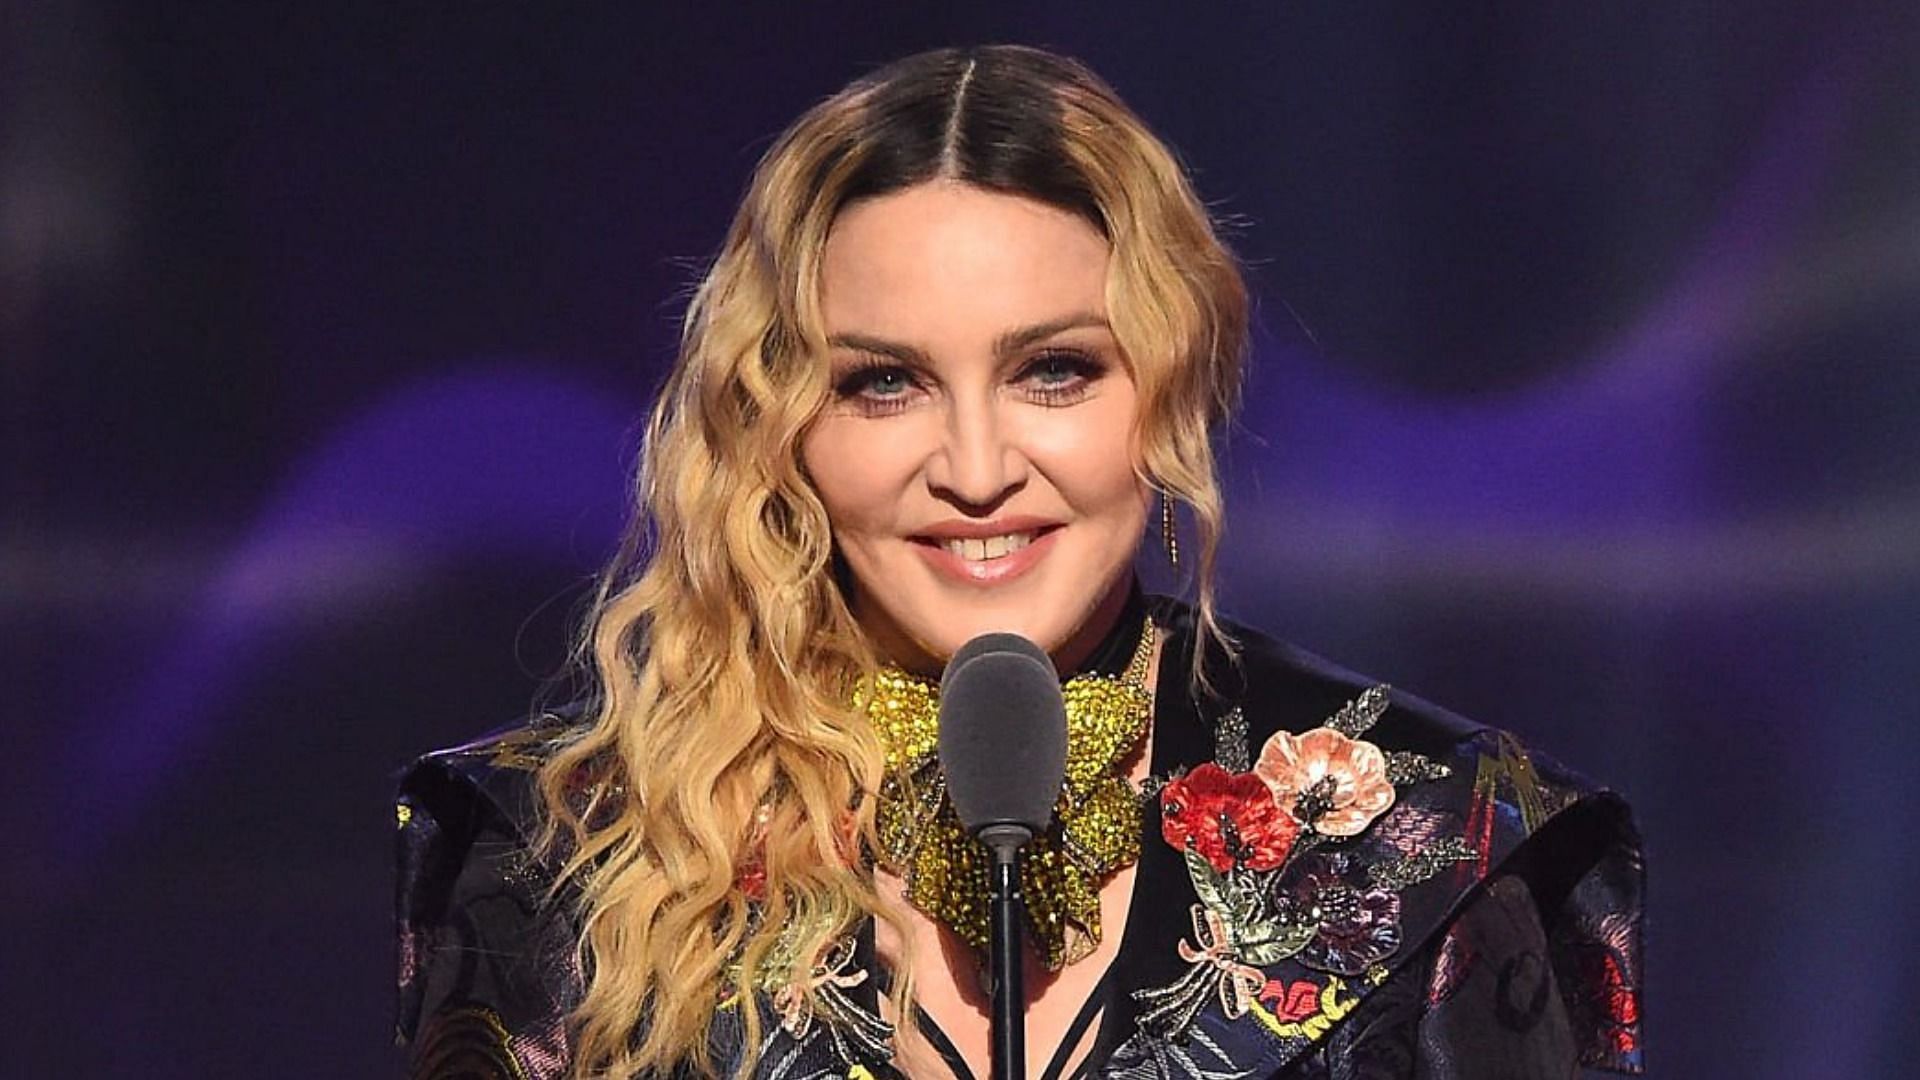 Madonna has launched her NFT collection in collaboration with Beeple (Image via Nicholas Hunt/Getty Images)